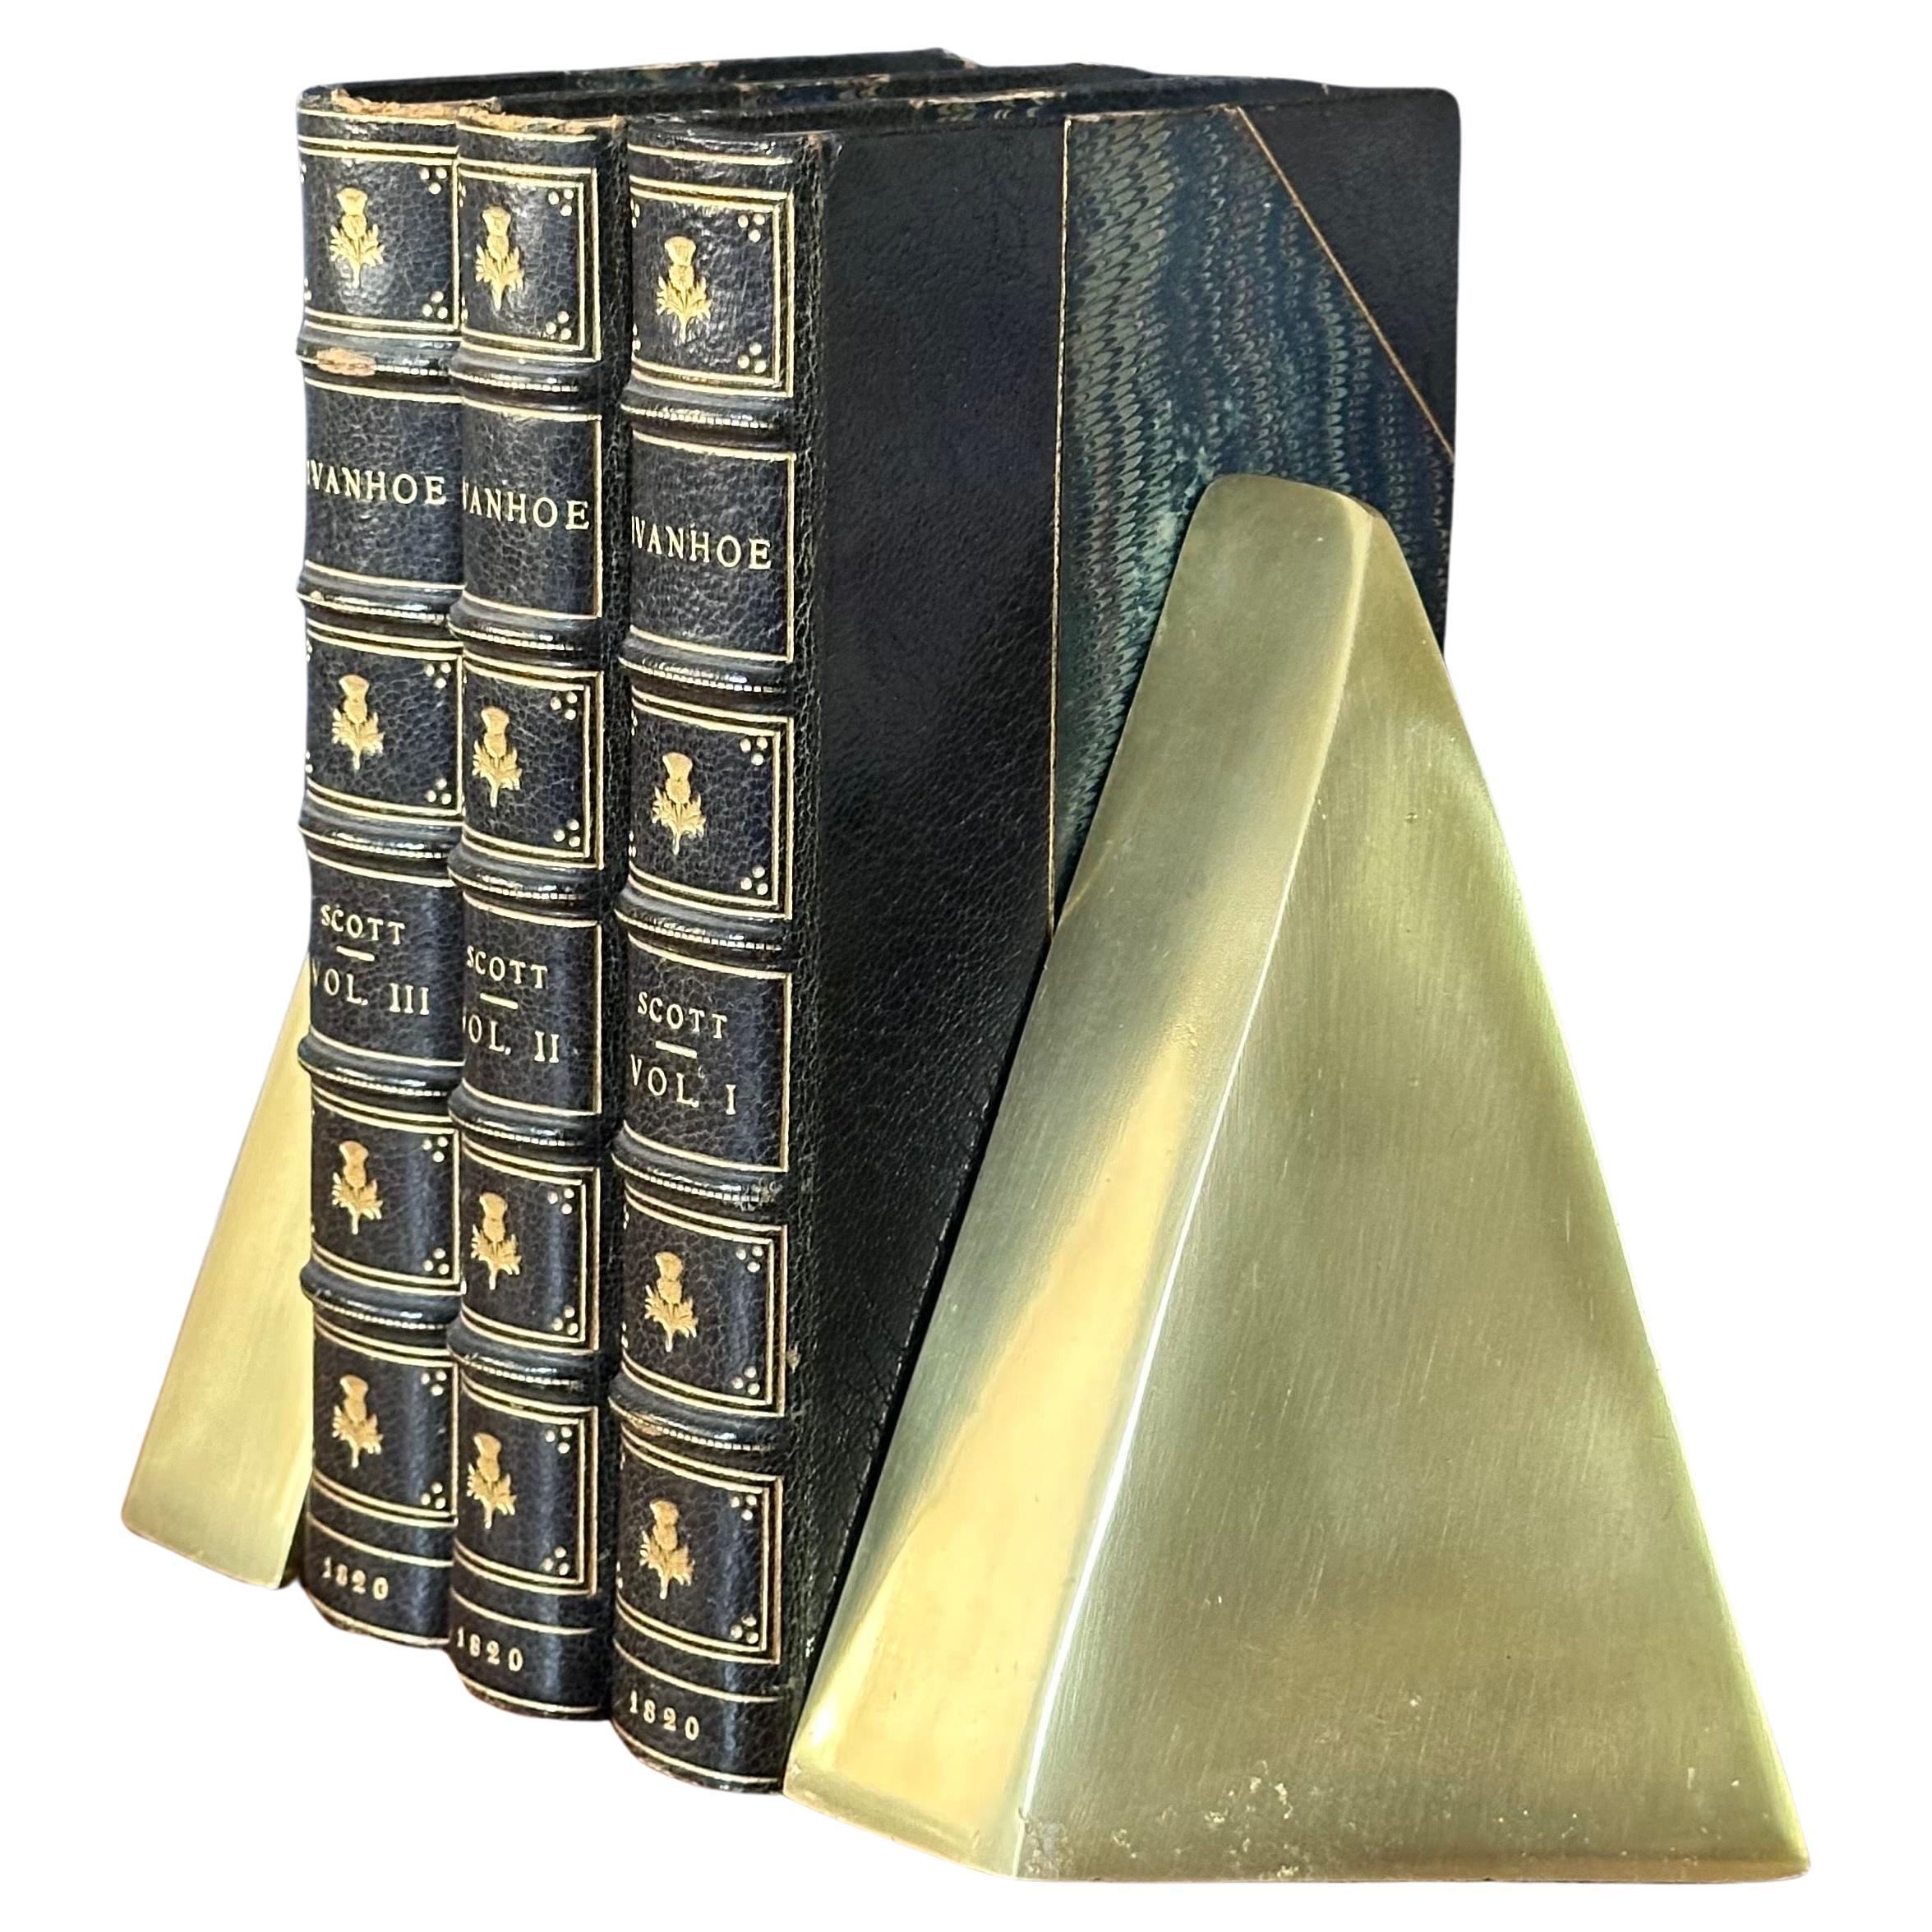 Pair of MCM sculptural brass bookends in the style of William Macowski, 1970s.  The pair are in very good vintage condition with a great patina and measure 7.5